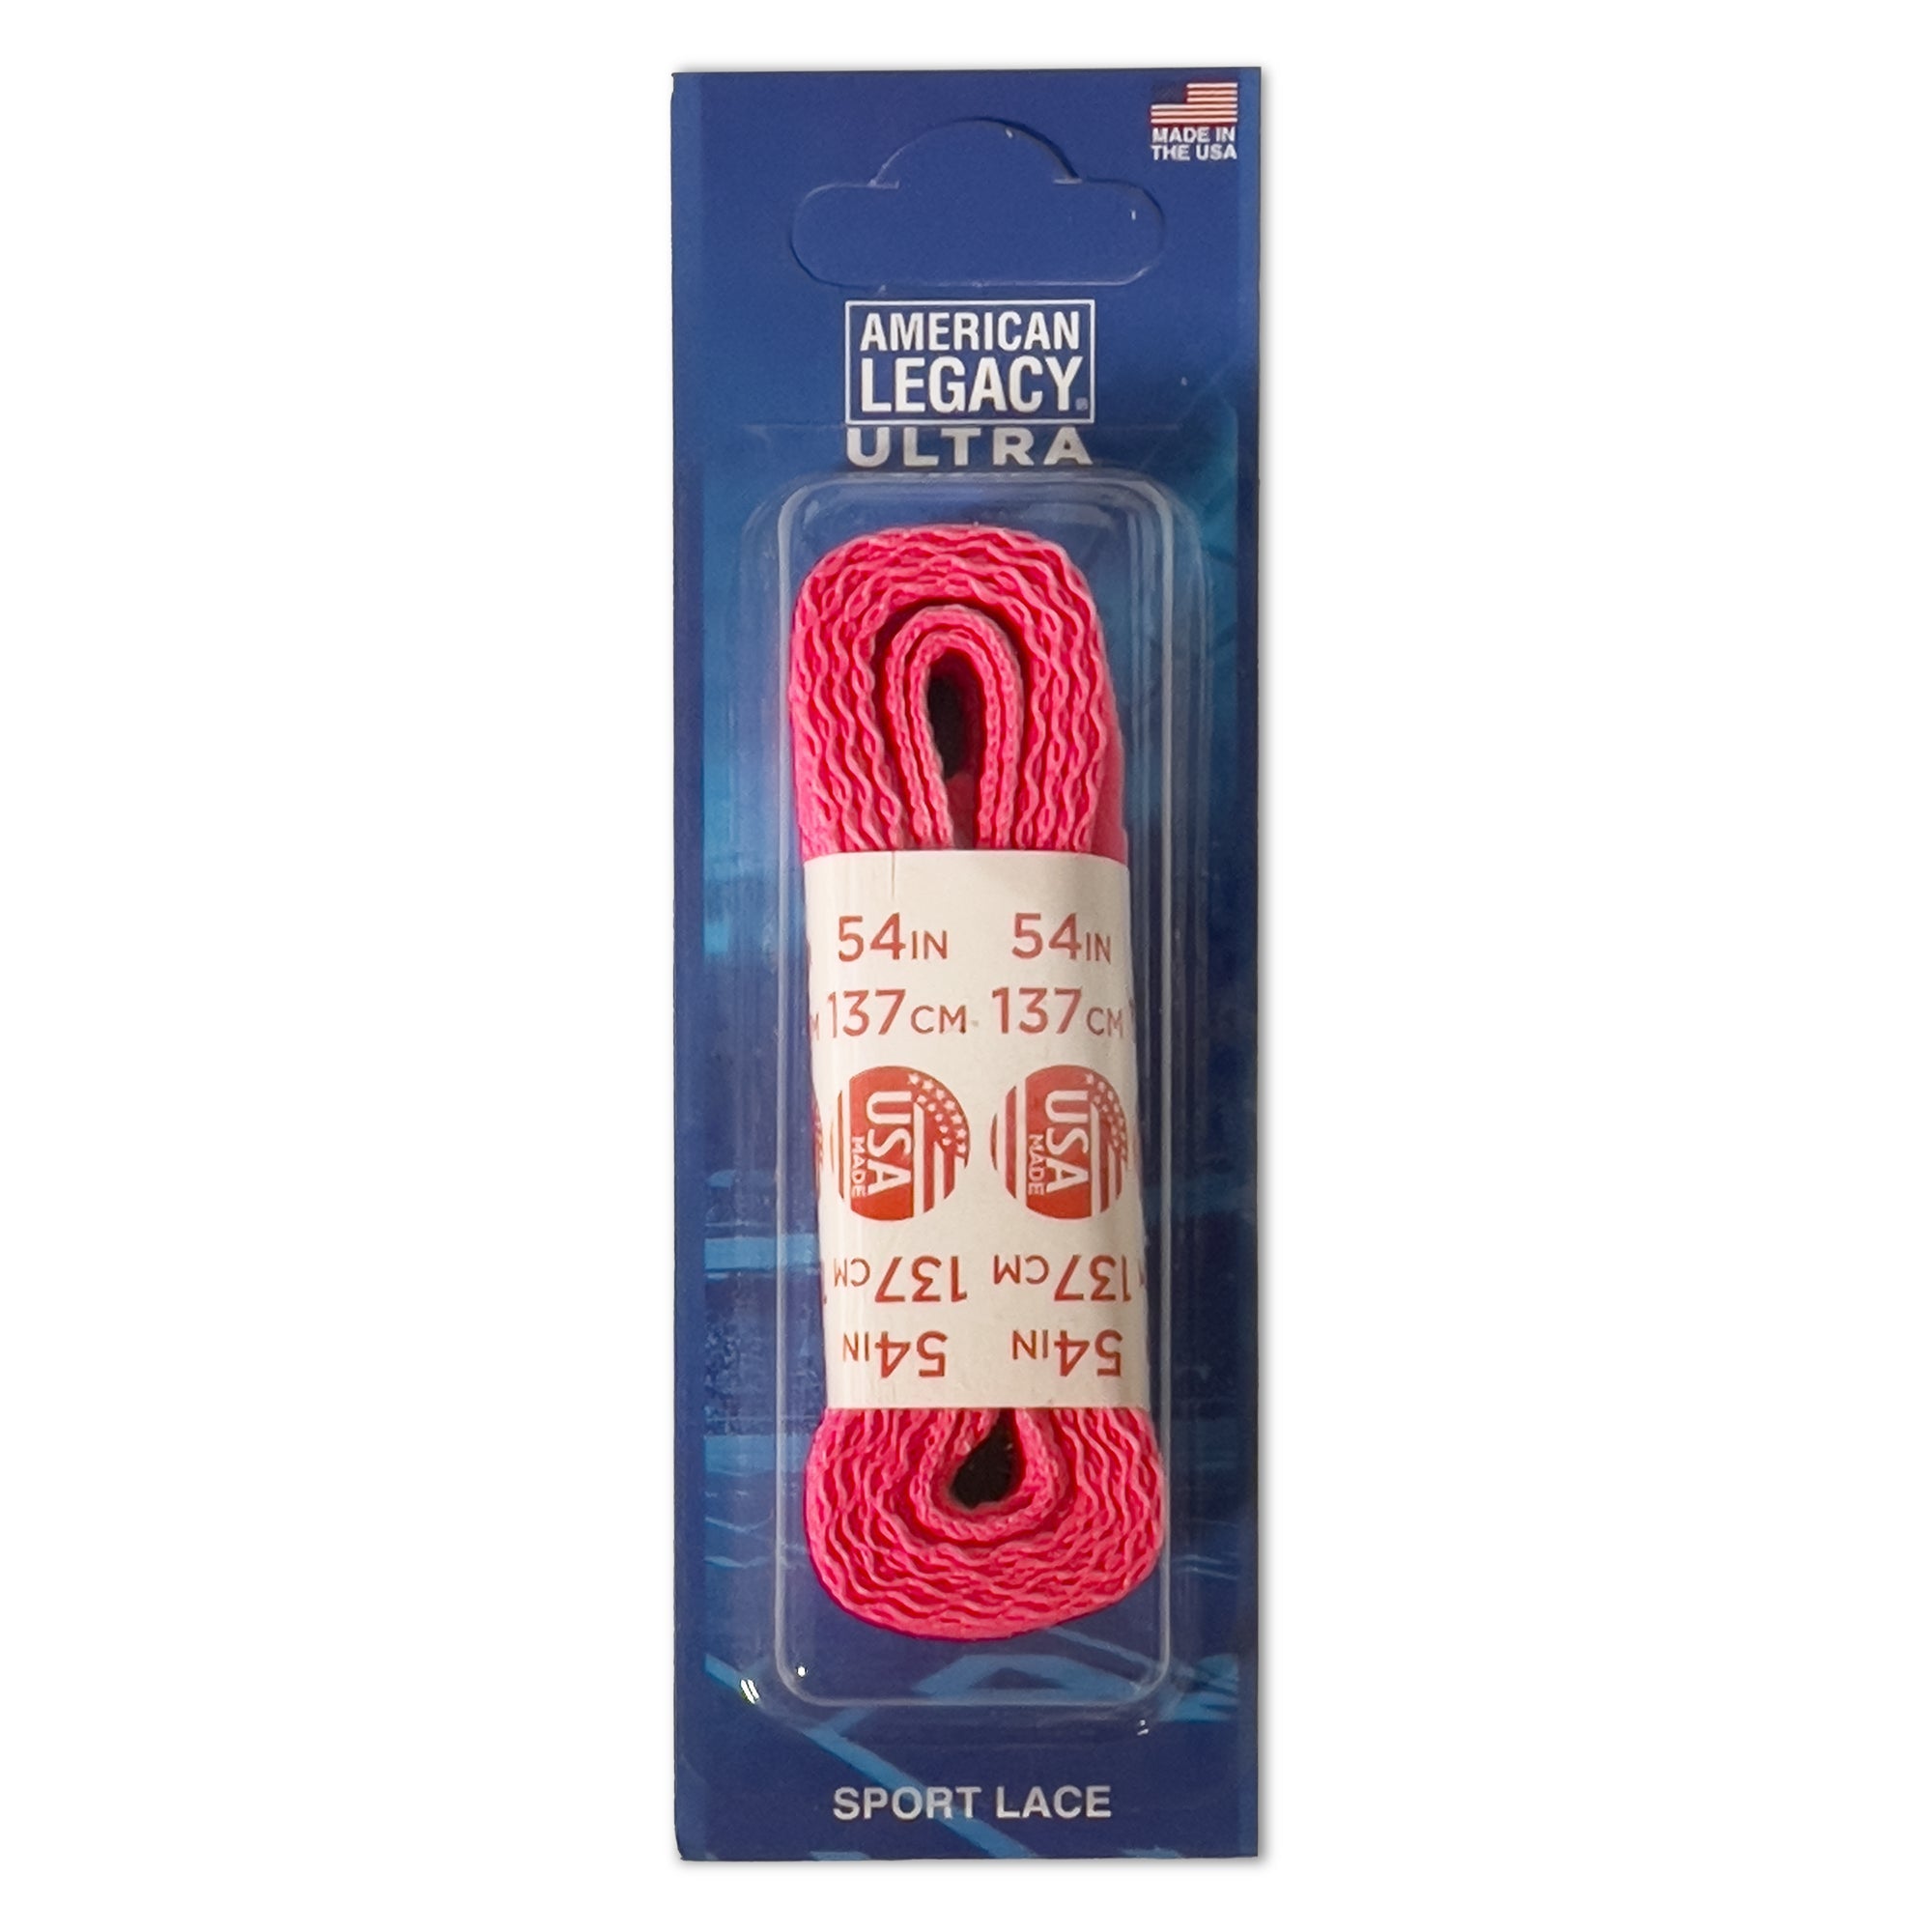 Bearfoot - Colored Laces - Merchandise